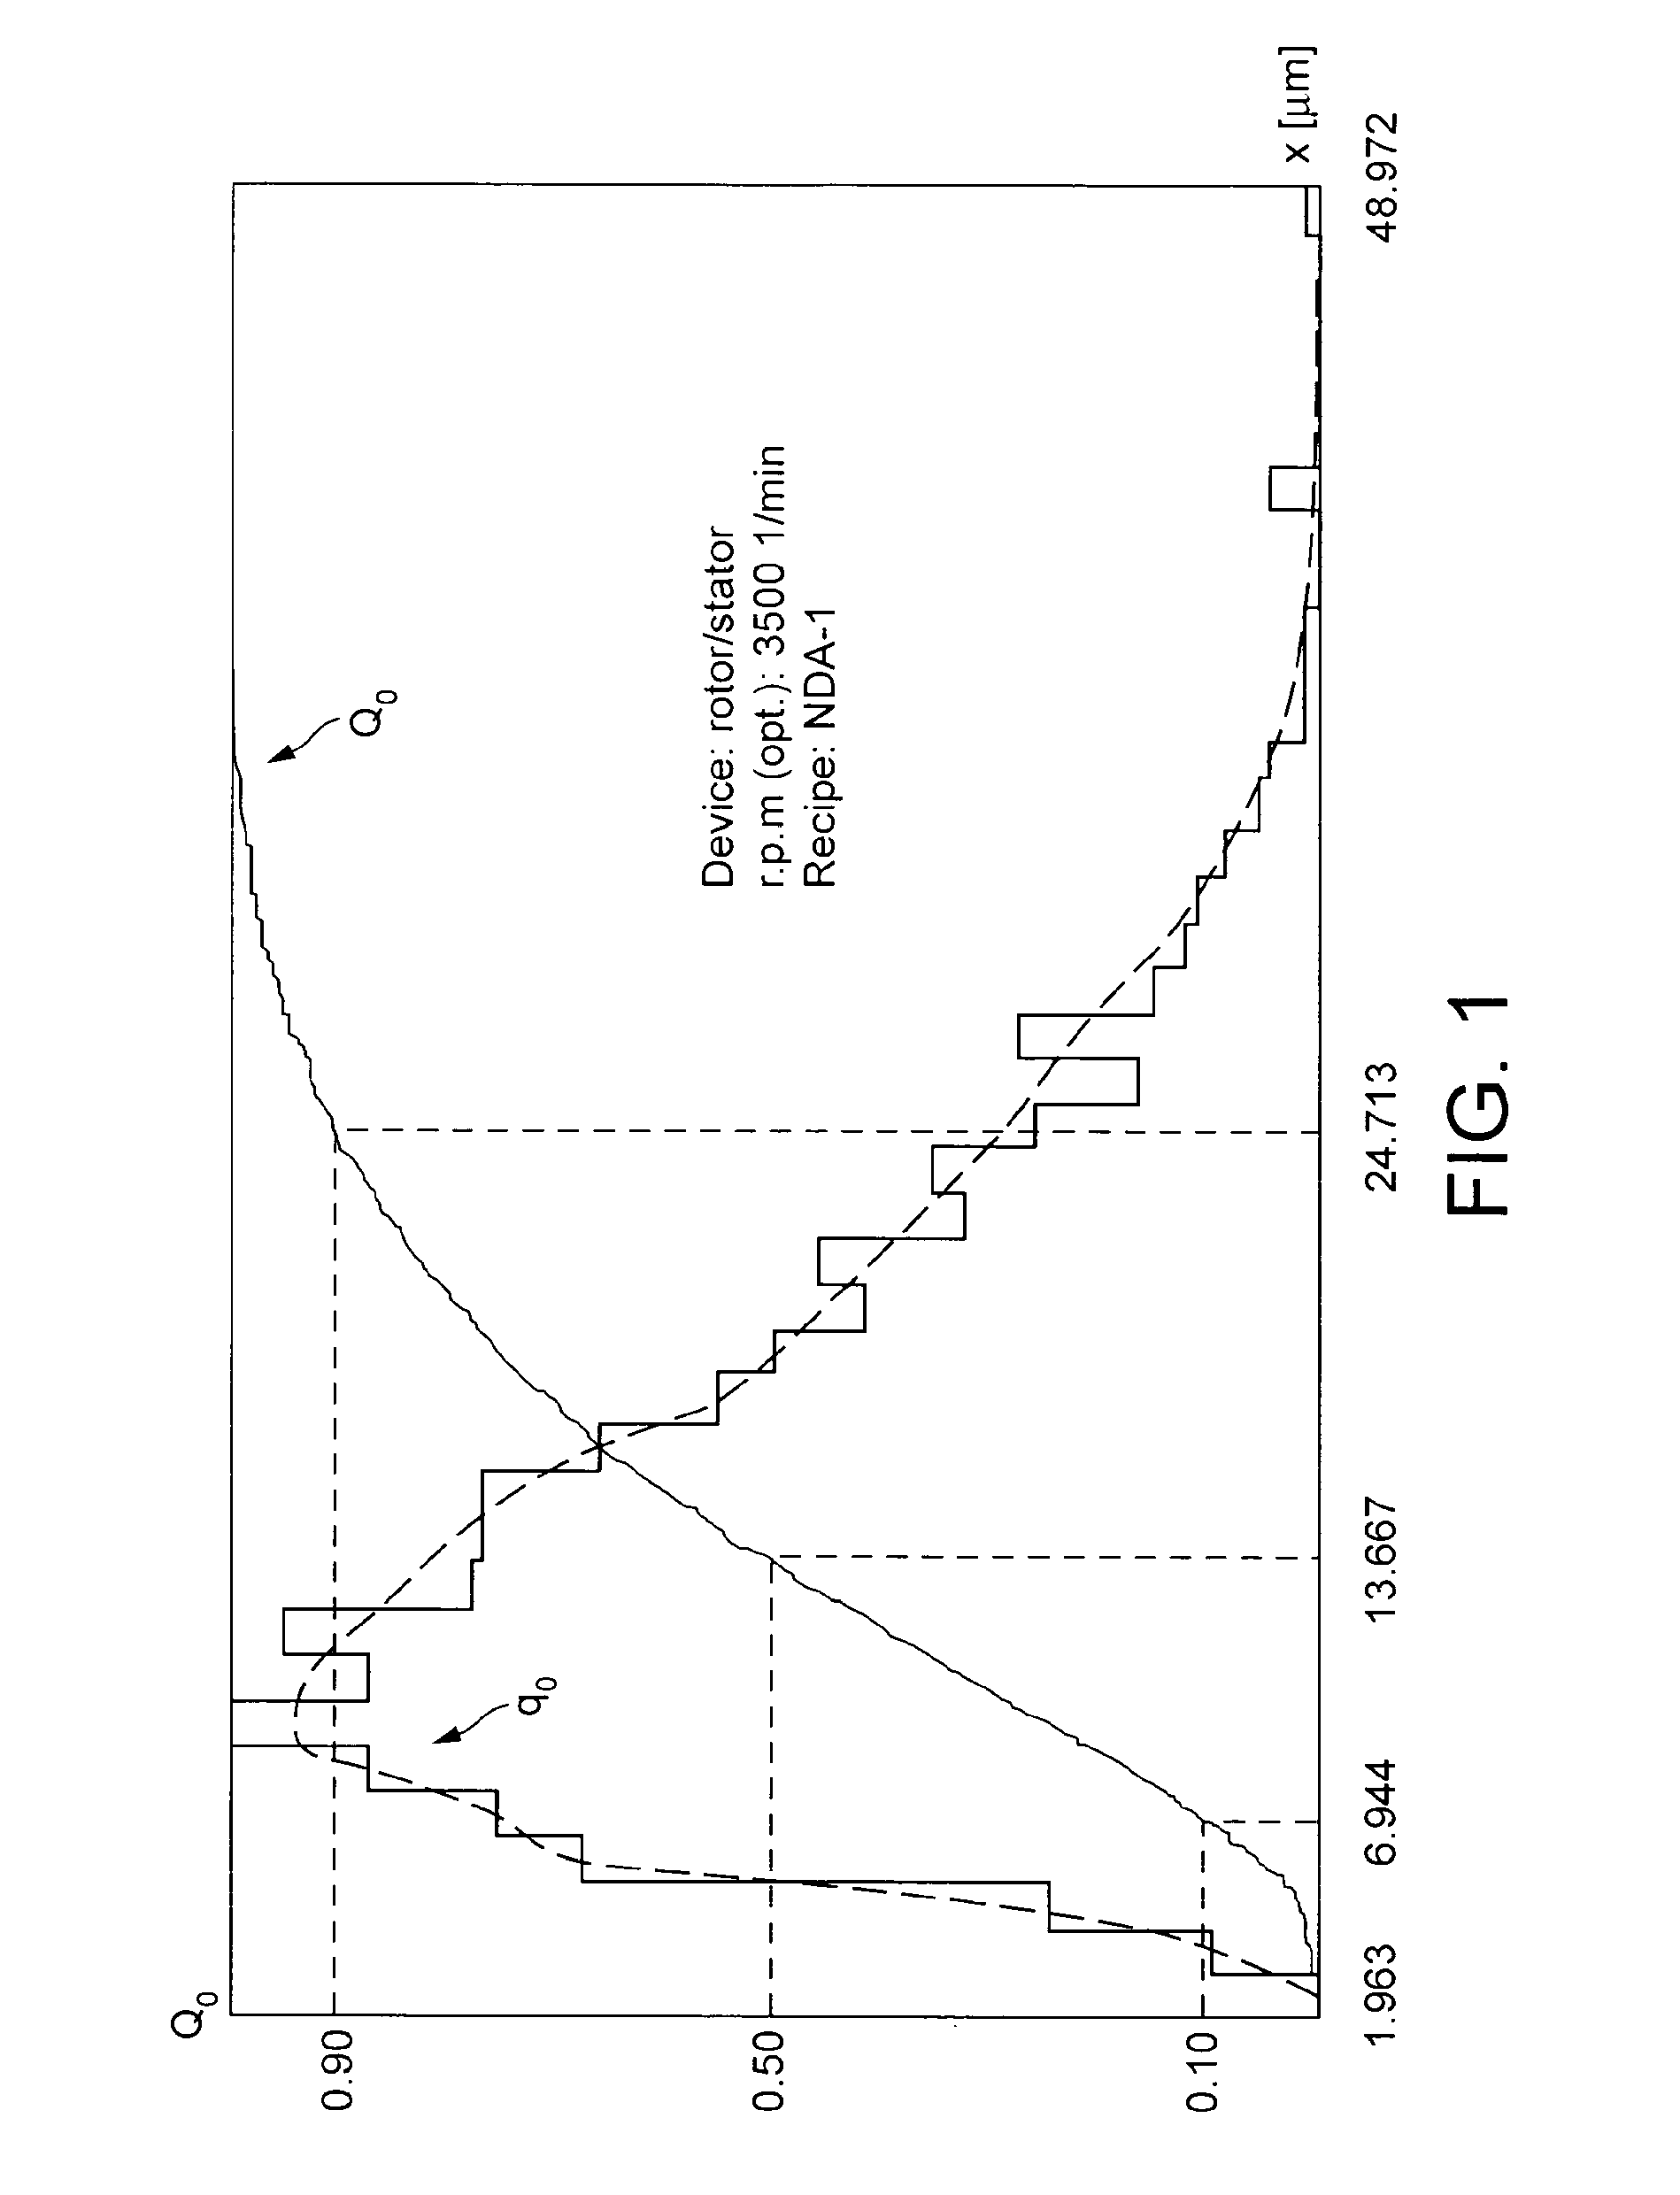 Cylindrical membrane apparatus for forming foam